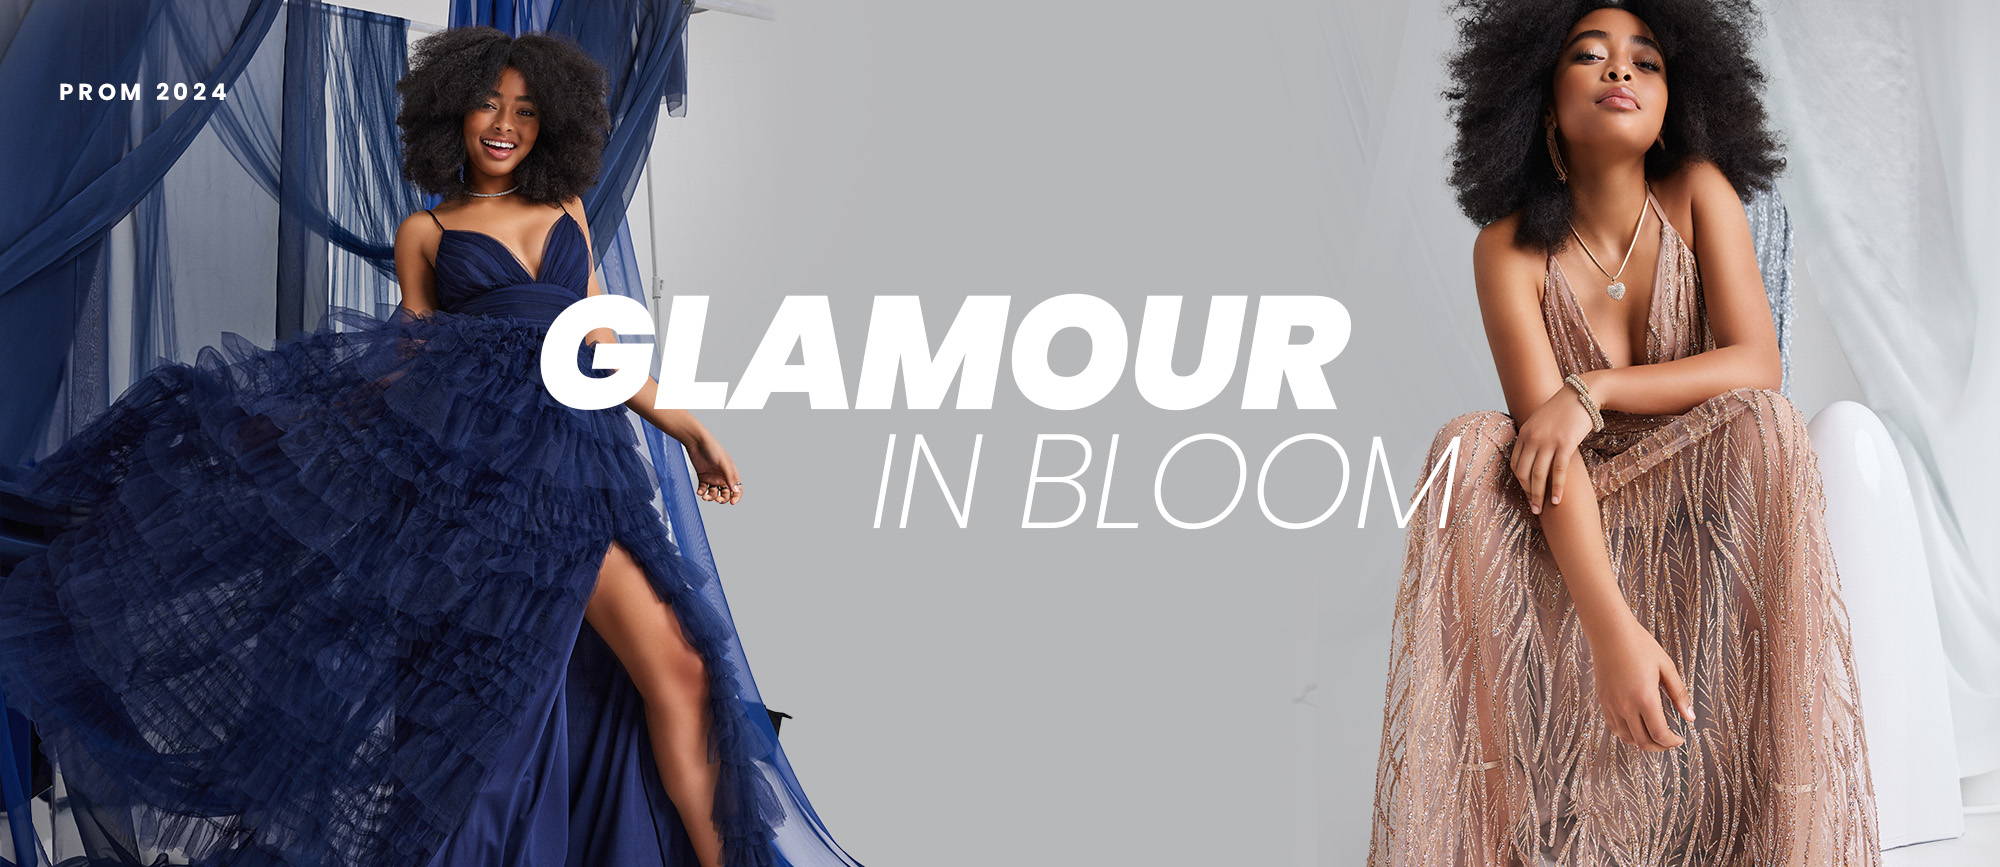 2024 Prom Dresses from Windsor make it a glam occasion with the latest formal styles in new colors, long prom dresses in sequin, glitter, or satin to find your perfect fit, textures and accents that stun, and more dresses for prom blooming with glamour! 